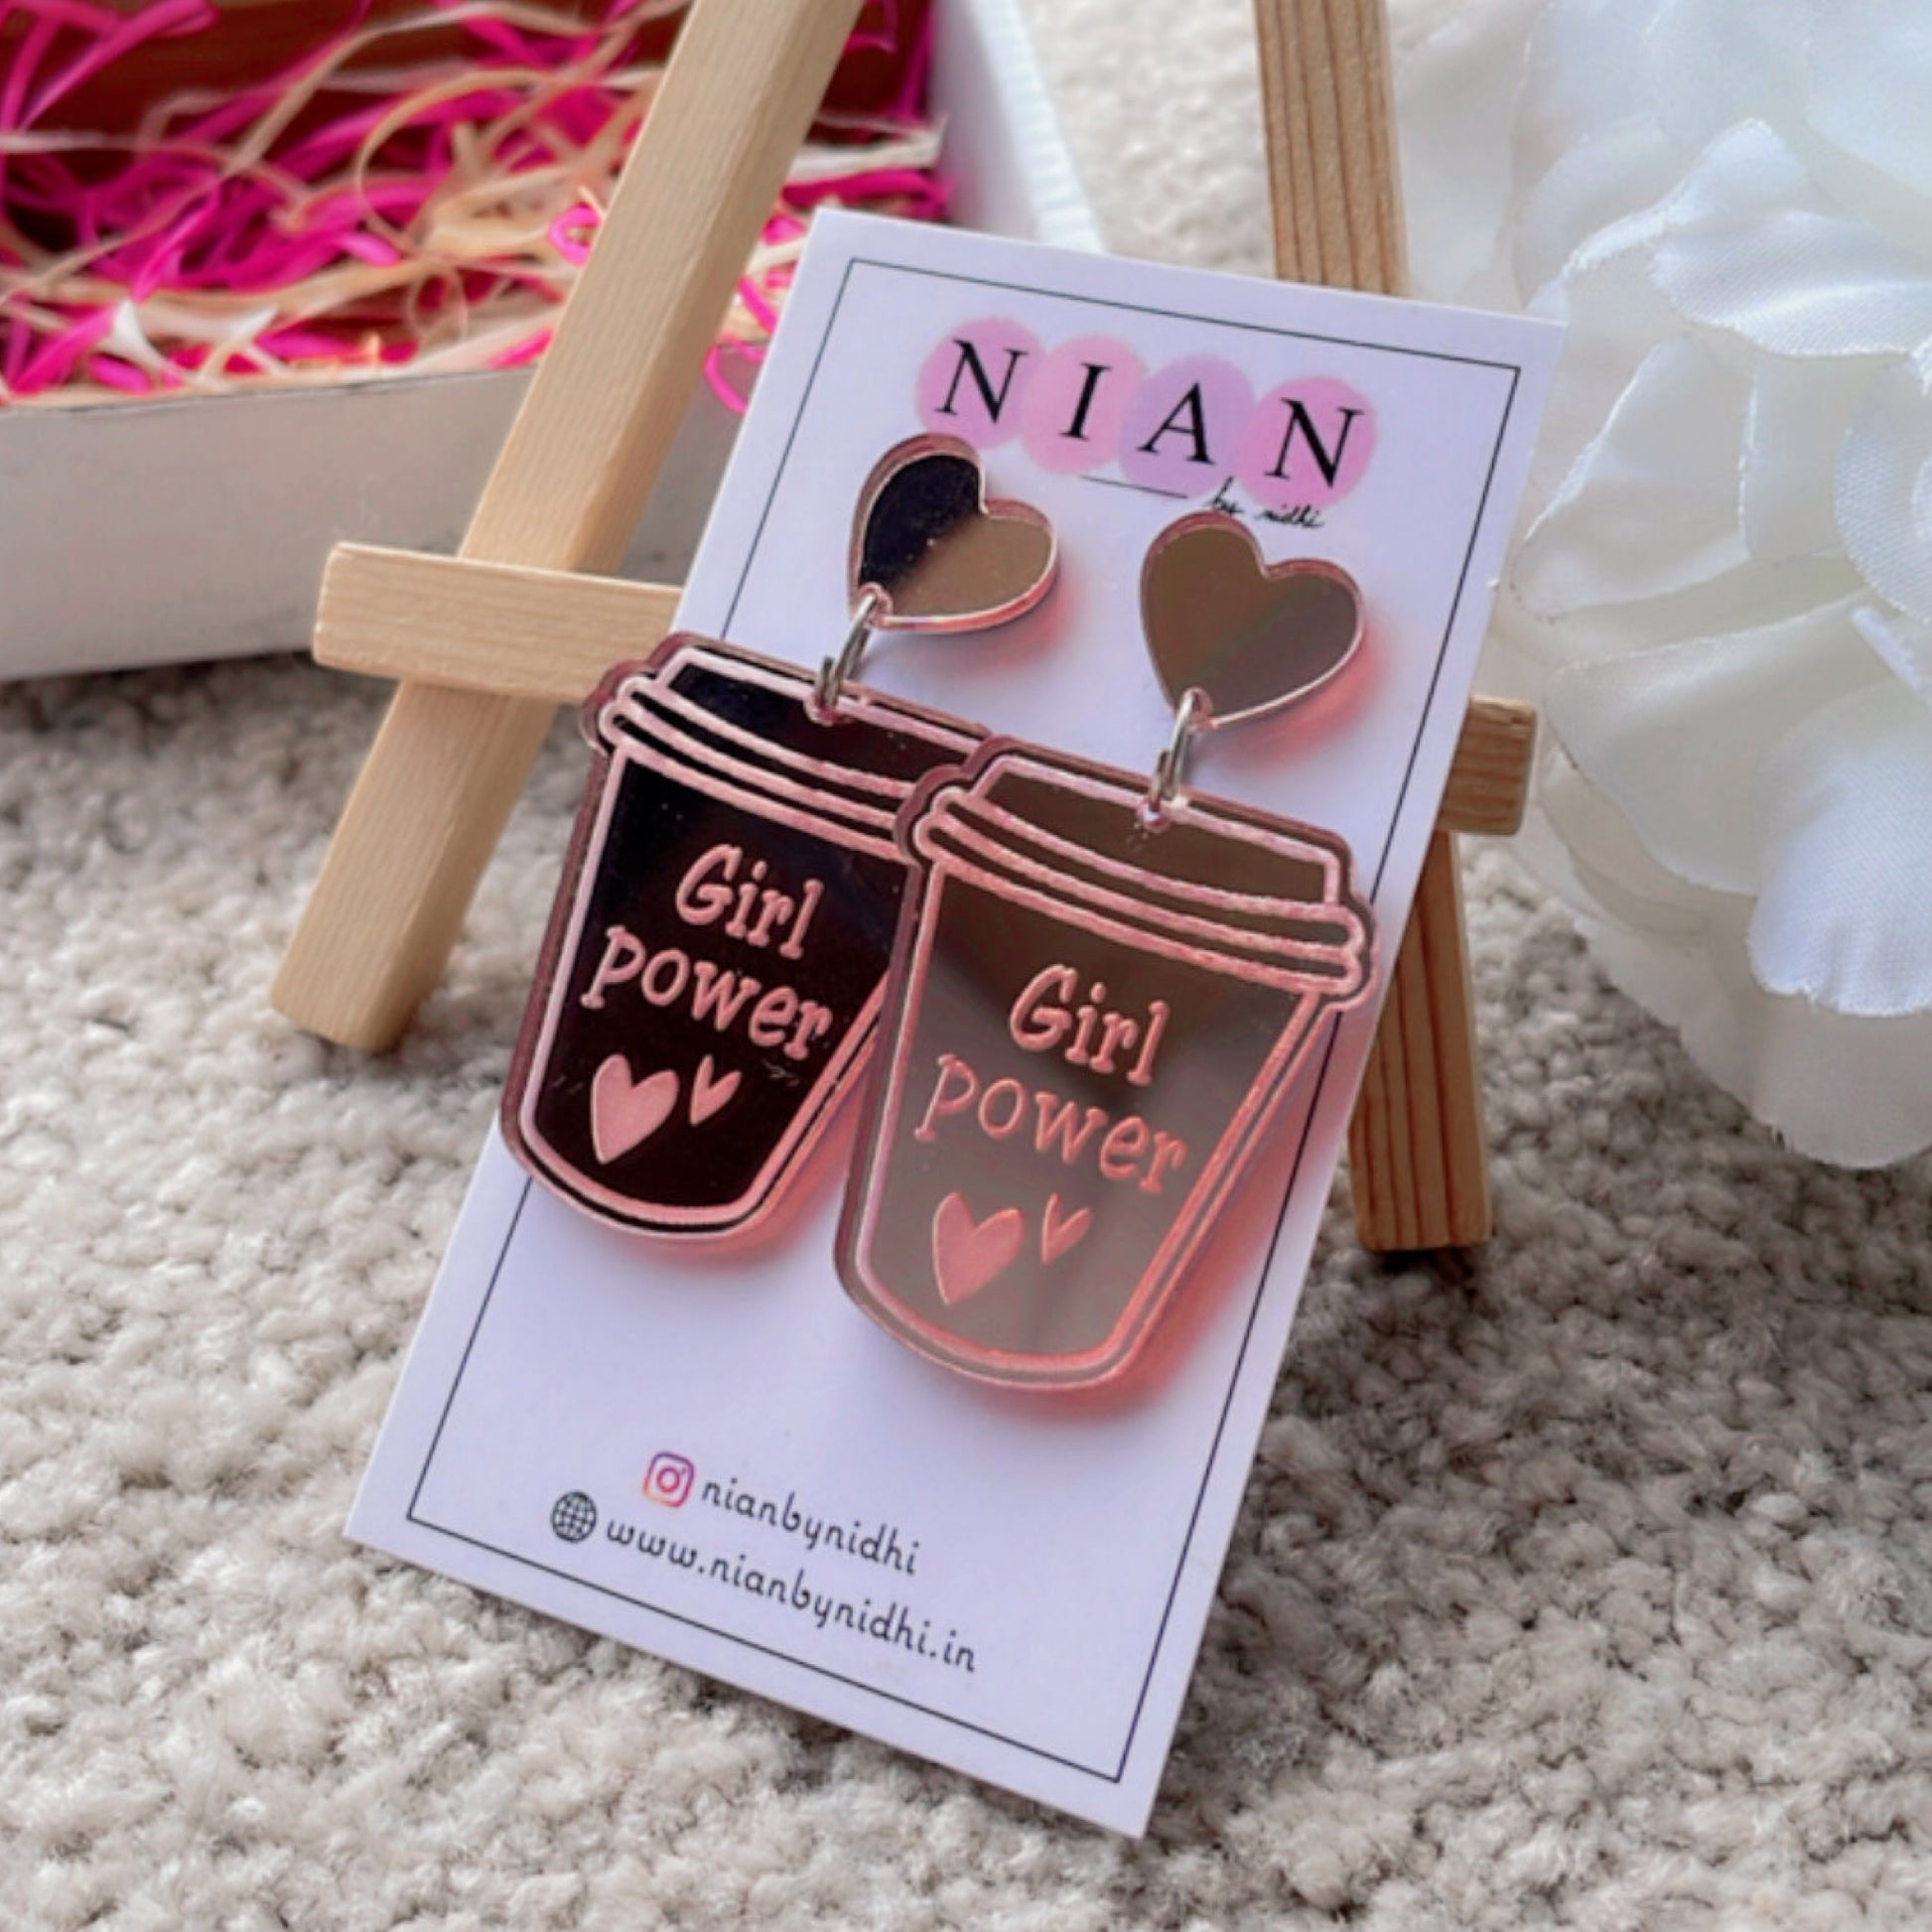 Girl Power Earrings - Nian by Nidhi - placed in  white and grey background